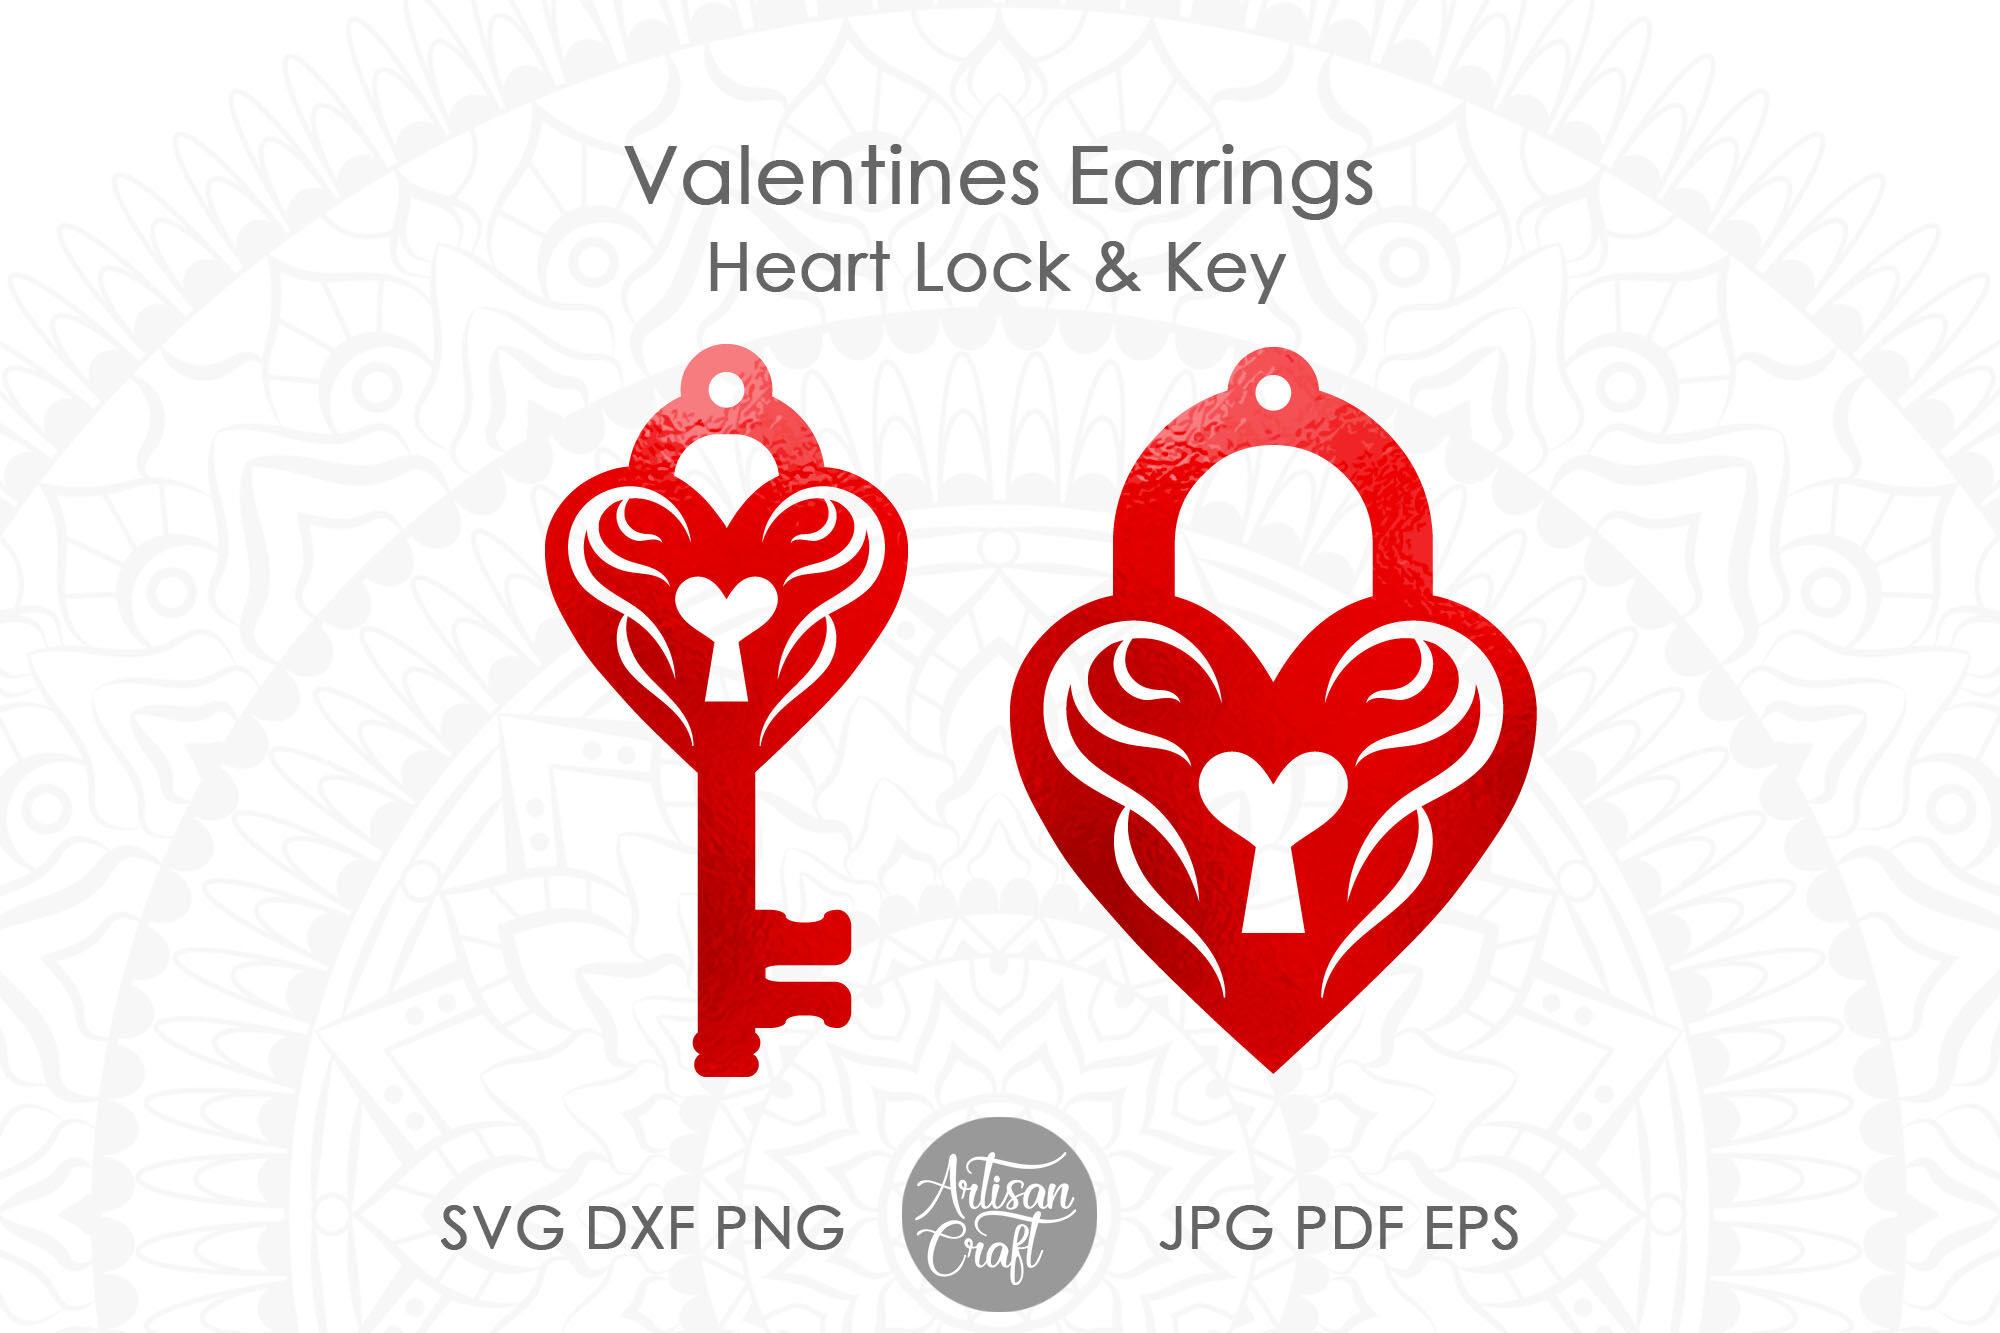 Heart lock and key earrings SVG By Artisan Craft SVG